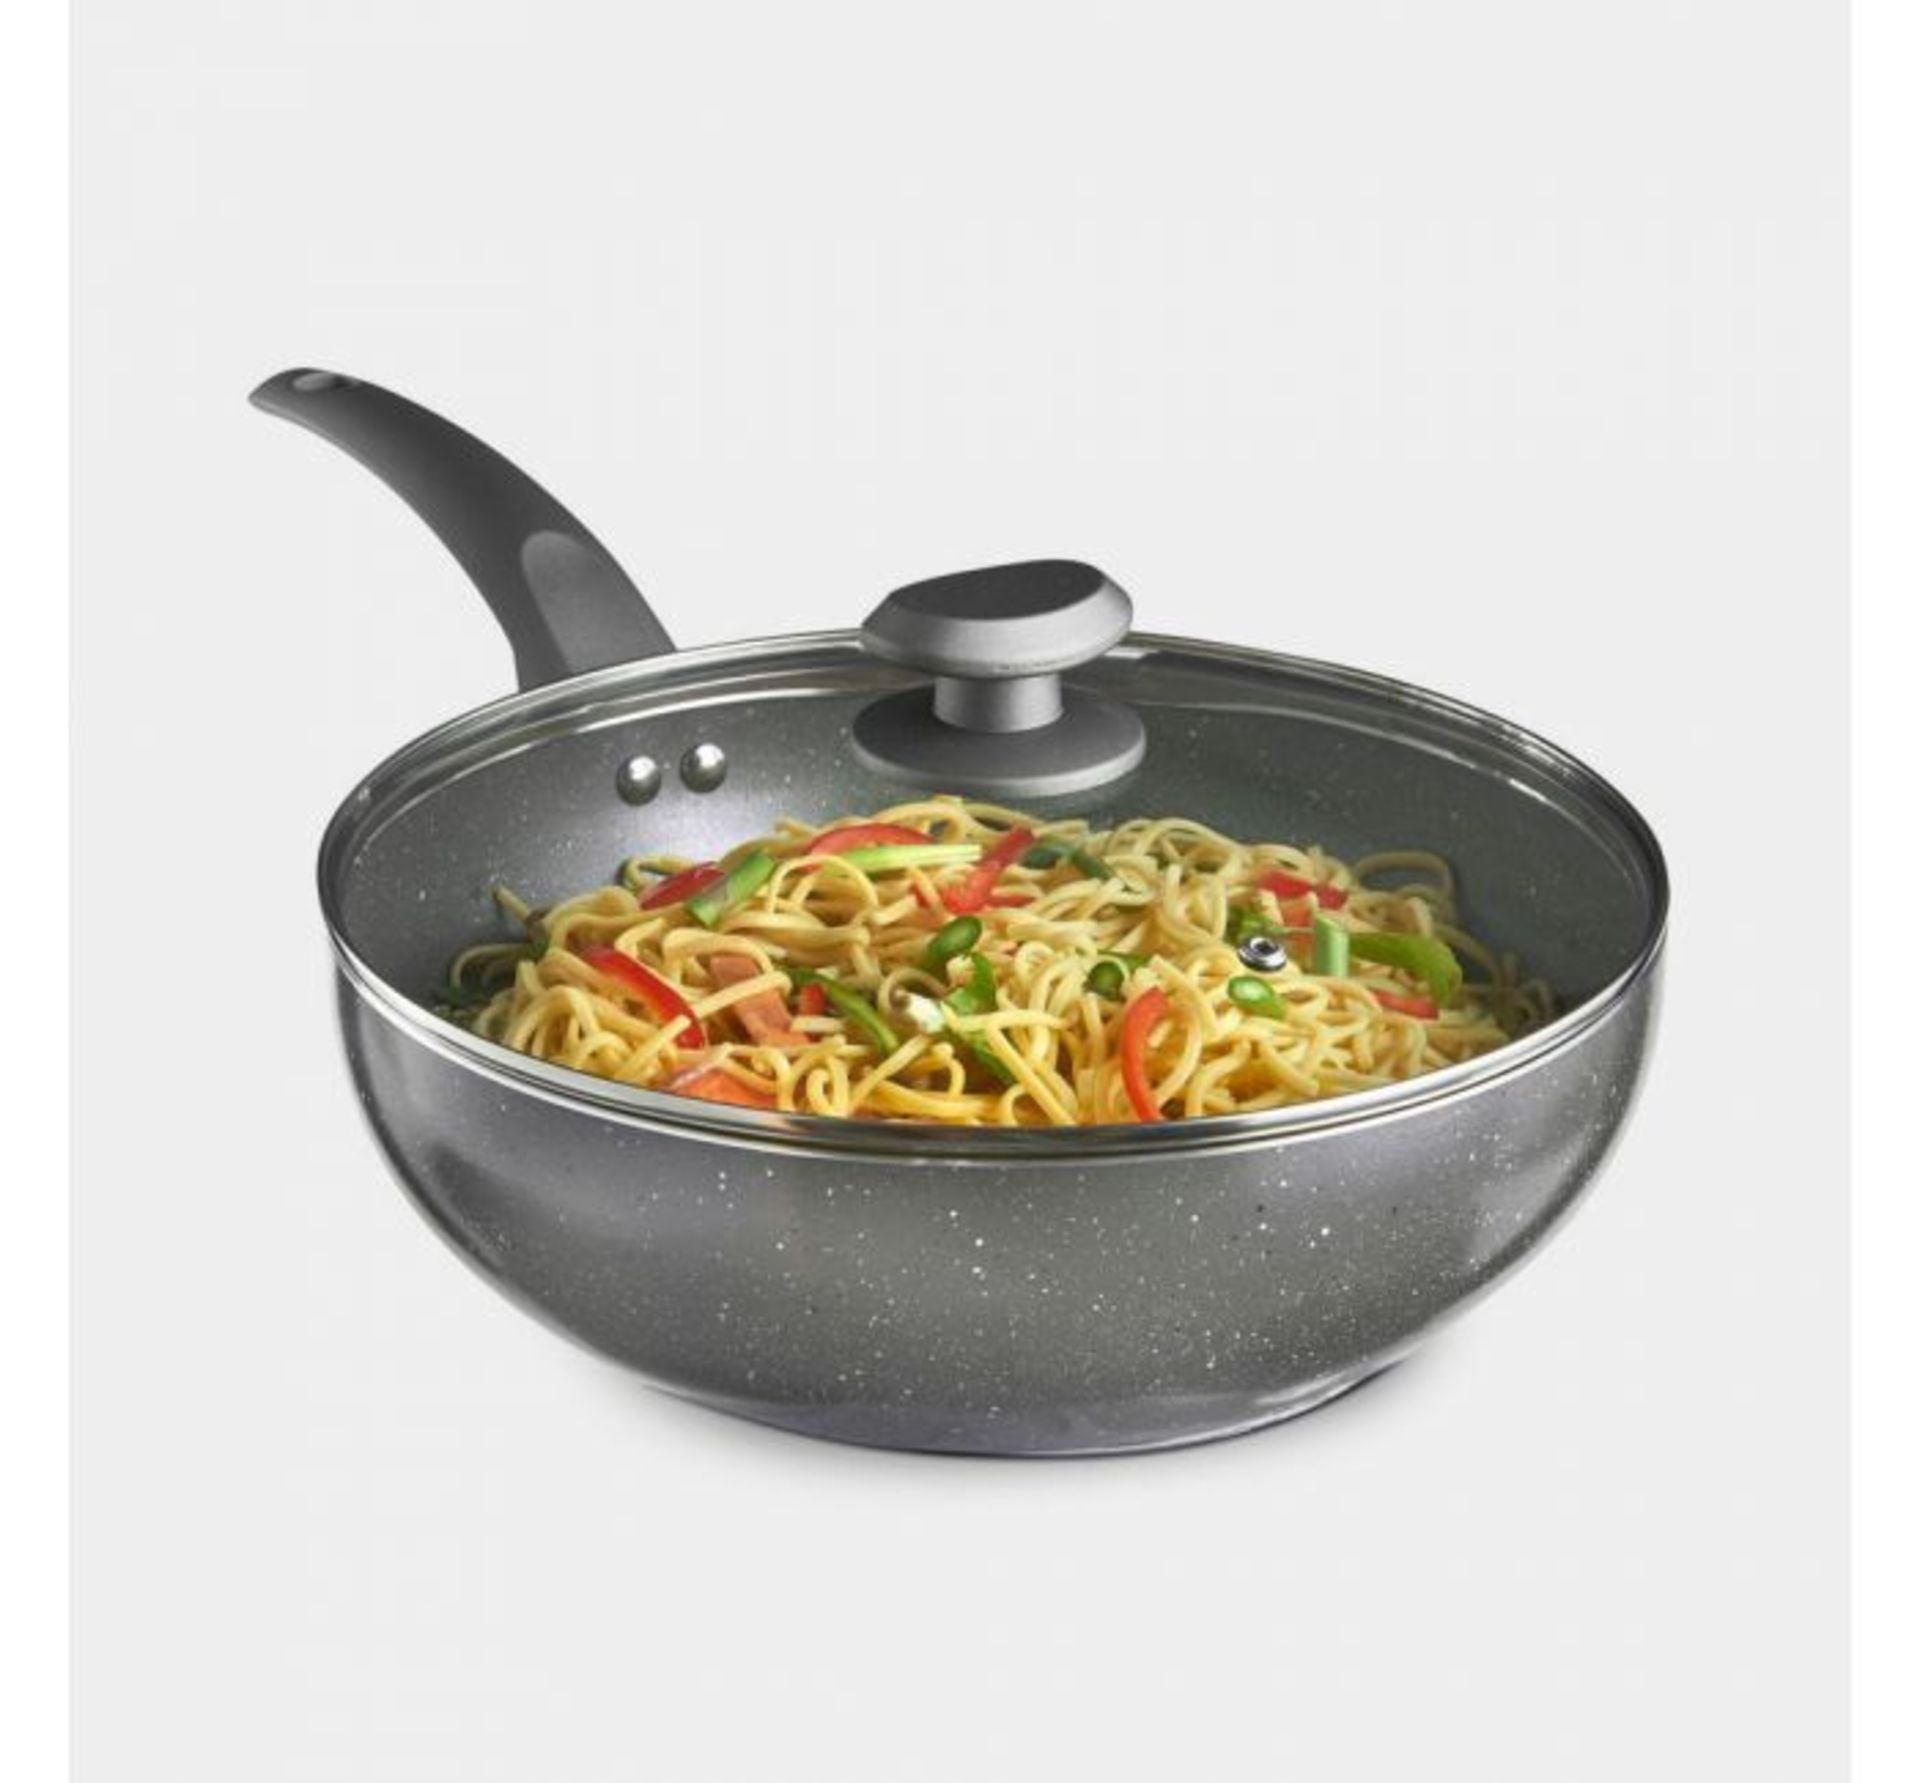 (OM66) 28cm Marble Wok 28cm diameter with 9cm depth – ideal for cooking vegetables, meats, f... - Image 2 of 3